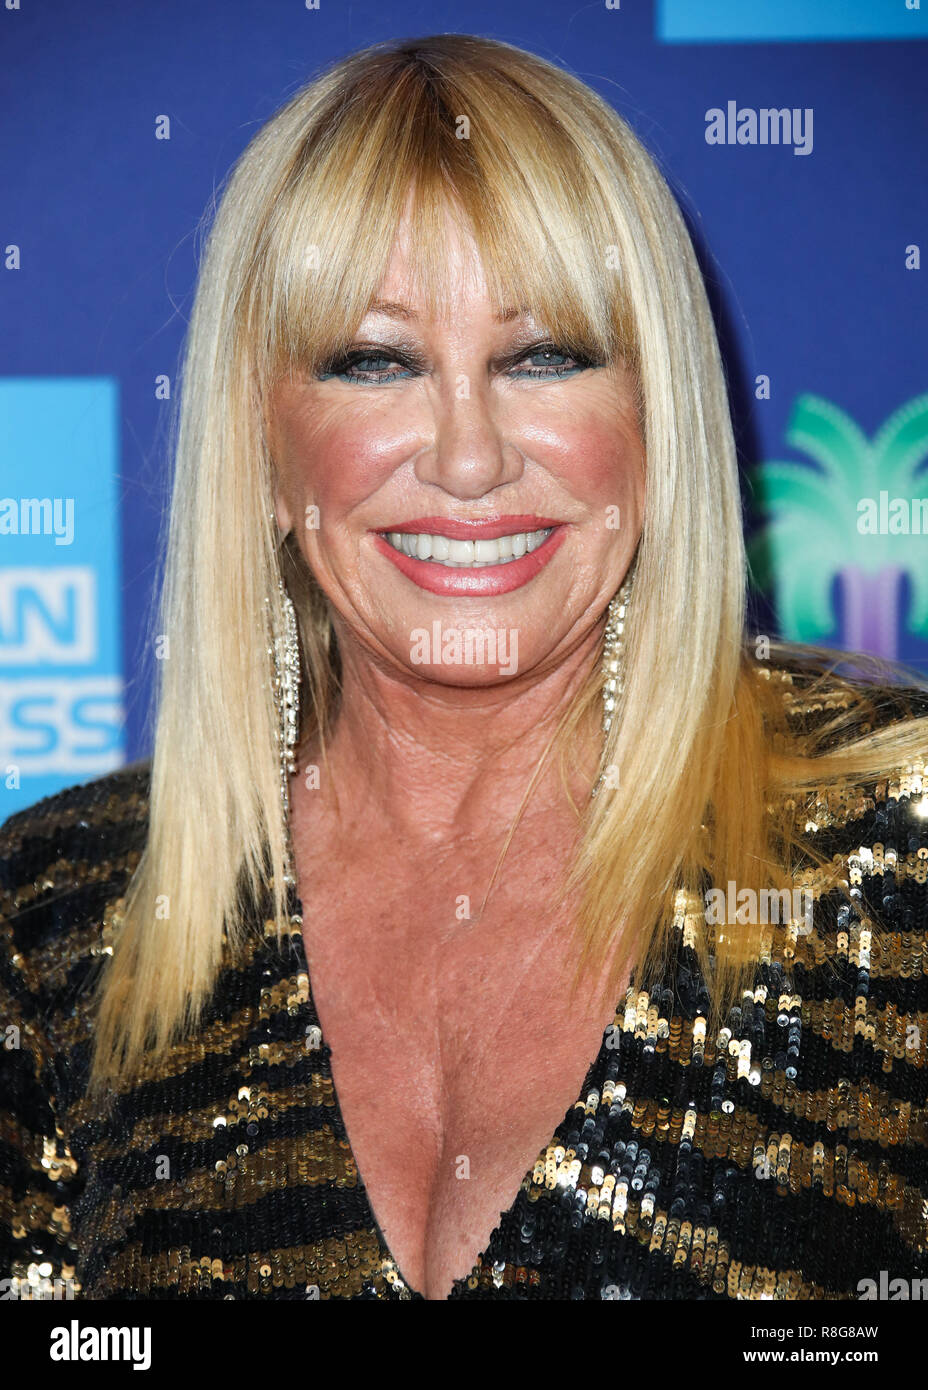 Palm Springs Ca Usa January 02 Suzanne Somers At The 29th Annual Palm Springs International